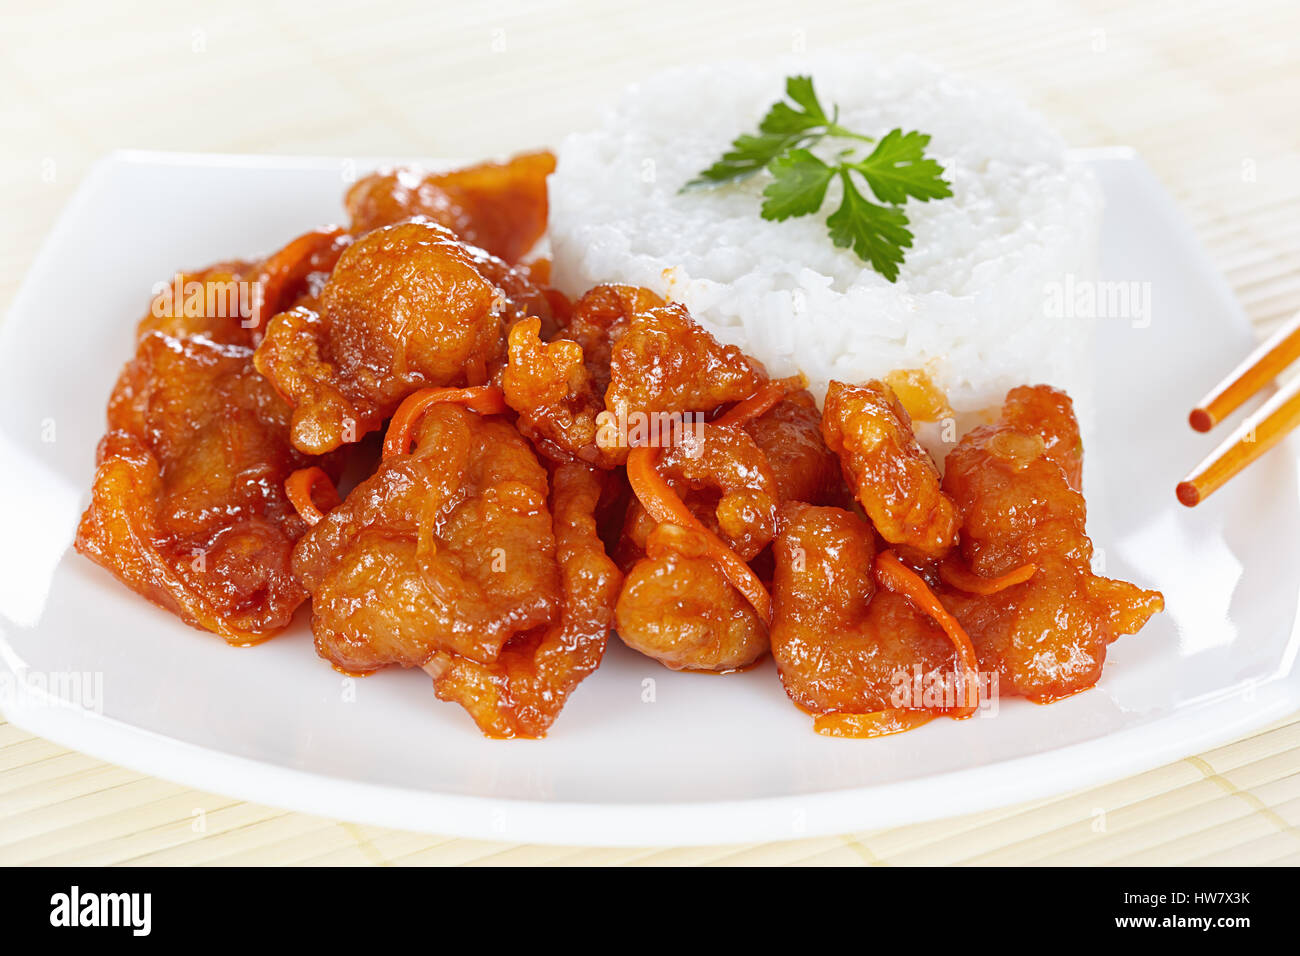 Chinese cuisine. Pork in batter and sweet and sour sauce Stock Photo